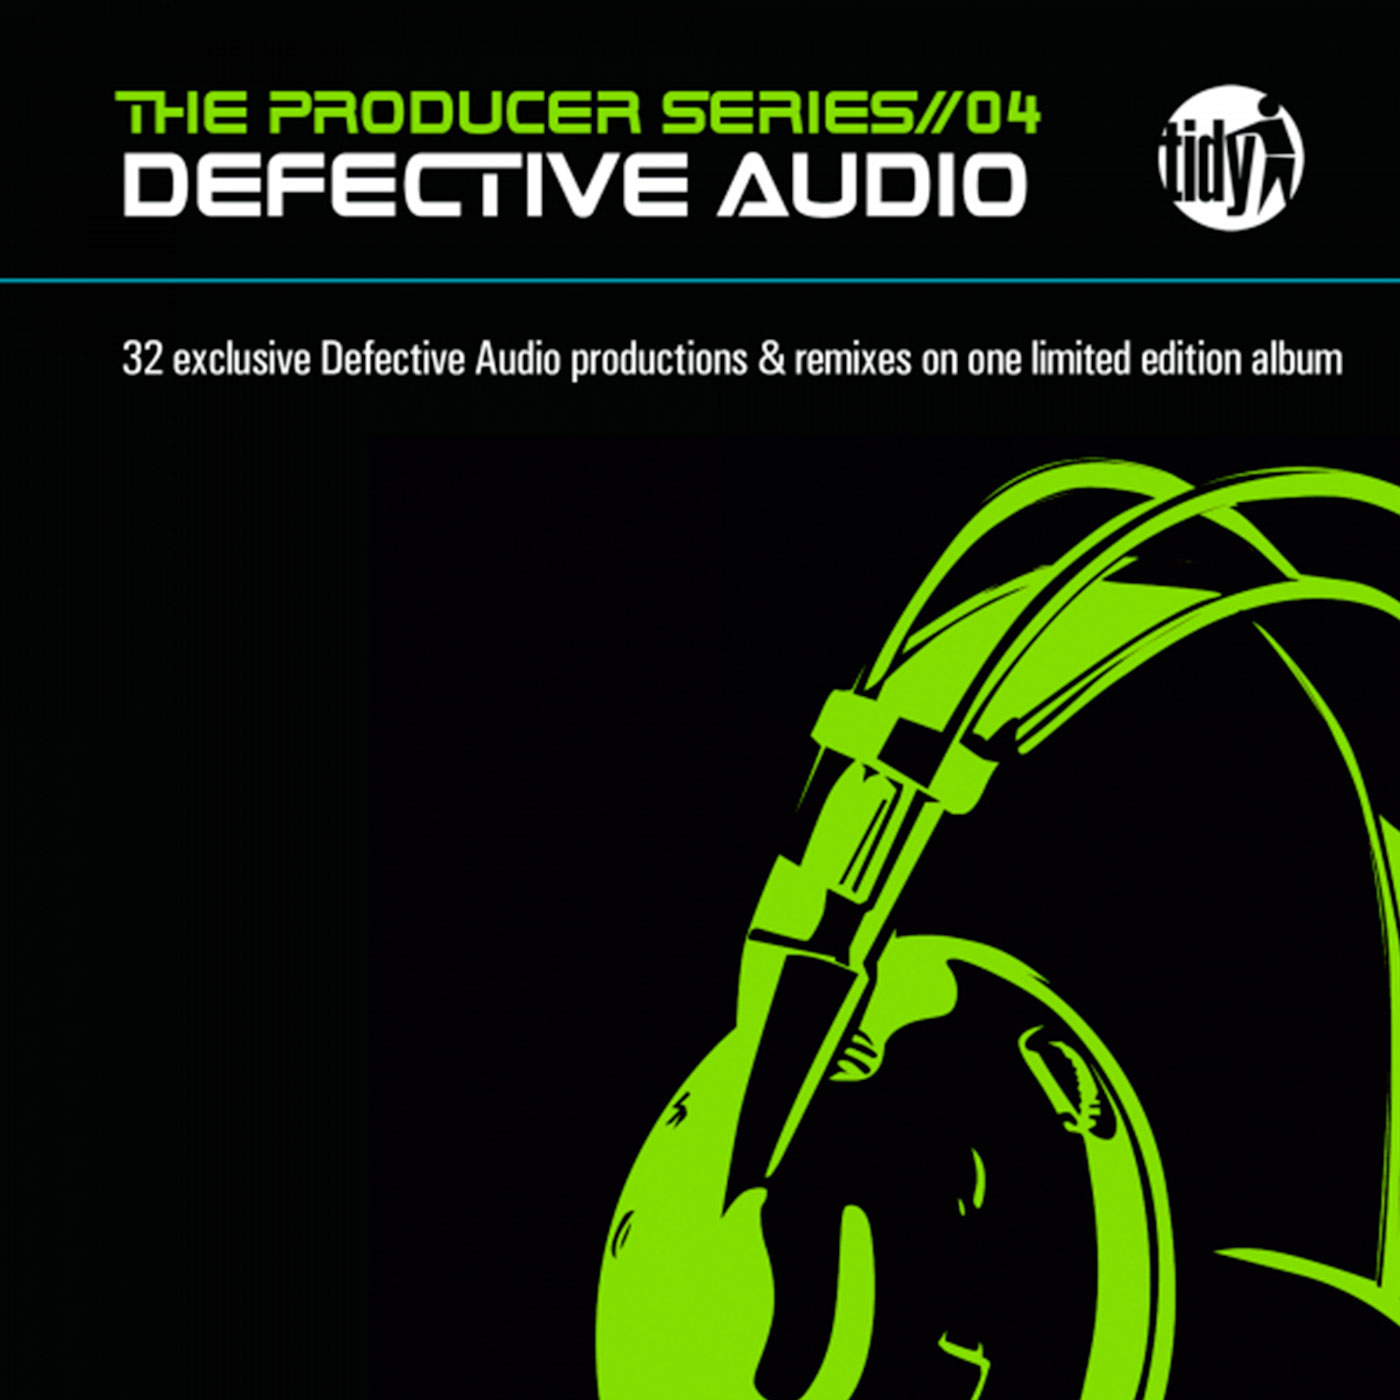 The Producer Series - Defective Audio